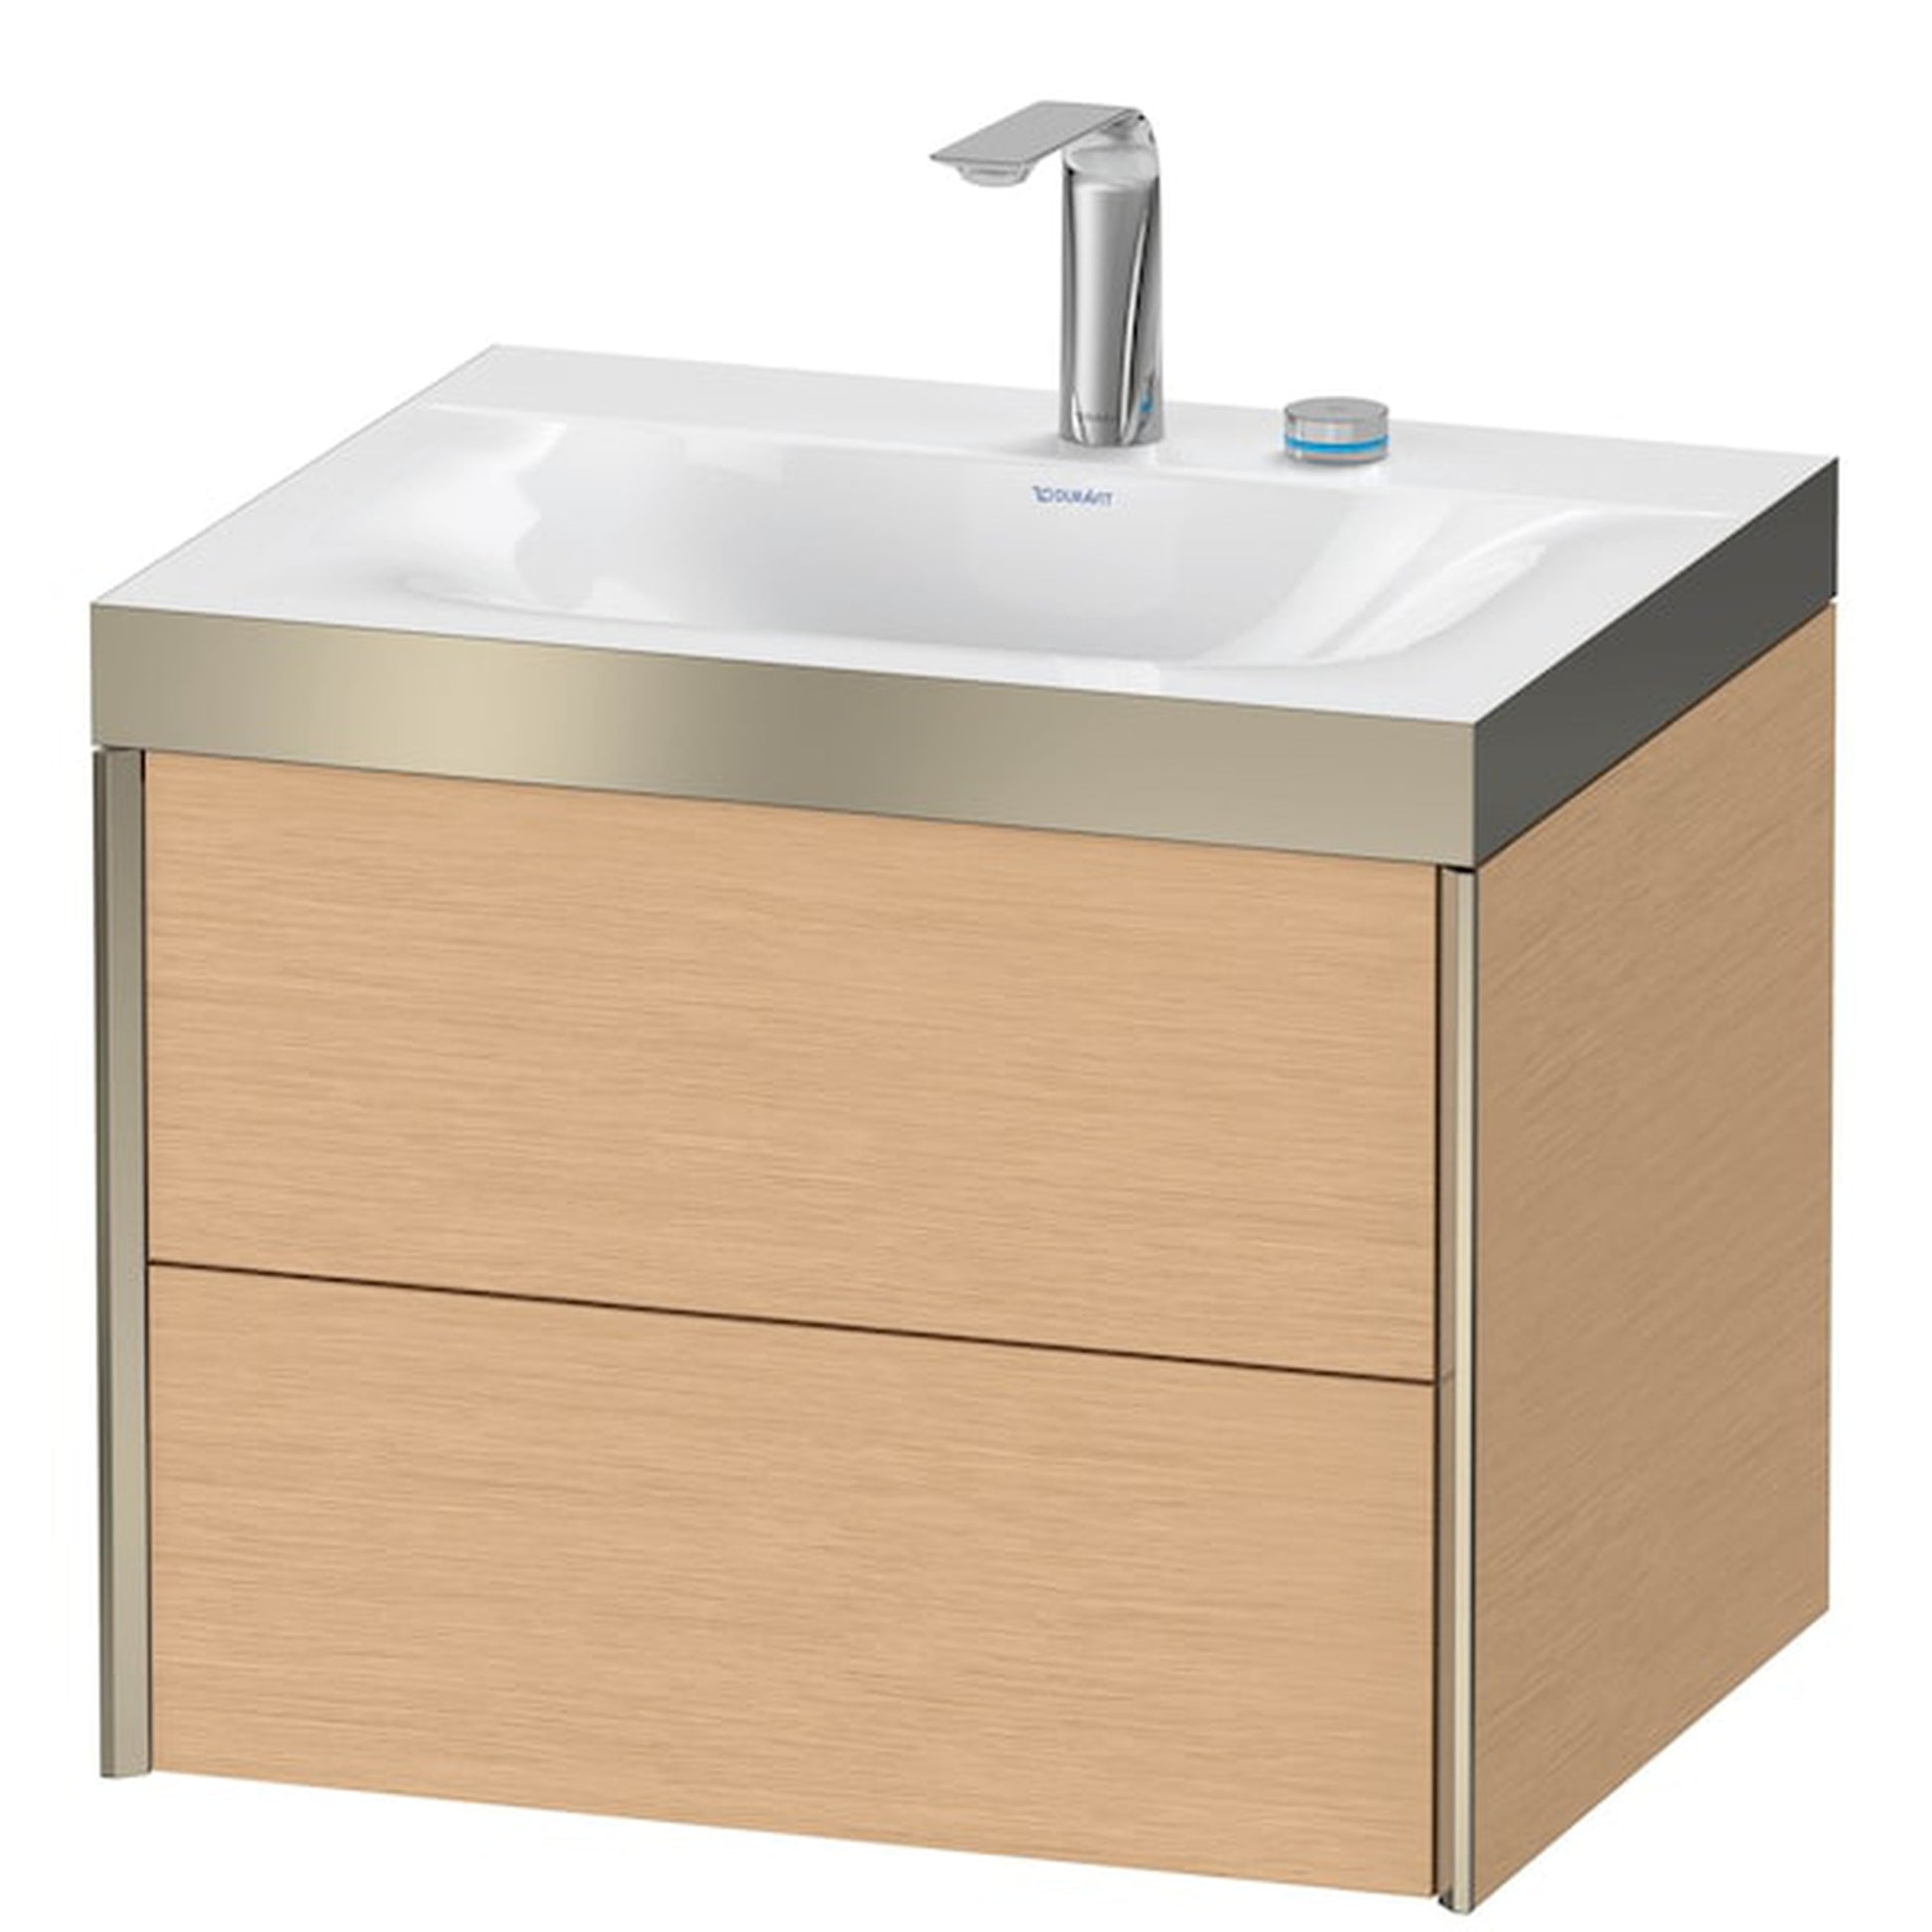 Duravit Xviu 24" x 20" x 19" Two Drawer C-Bonded Wall-Mount Vanity Kit With Two Tap Holes, Brushed Oak (XV4614EB112P)